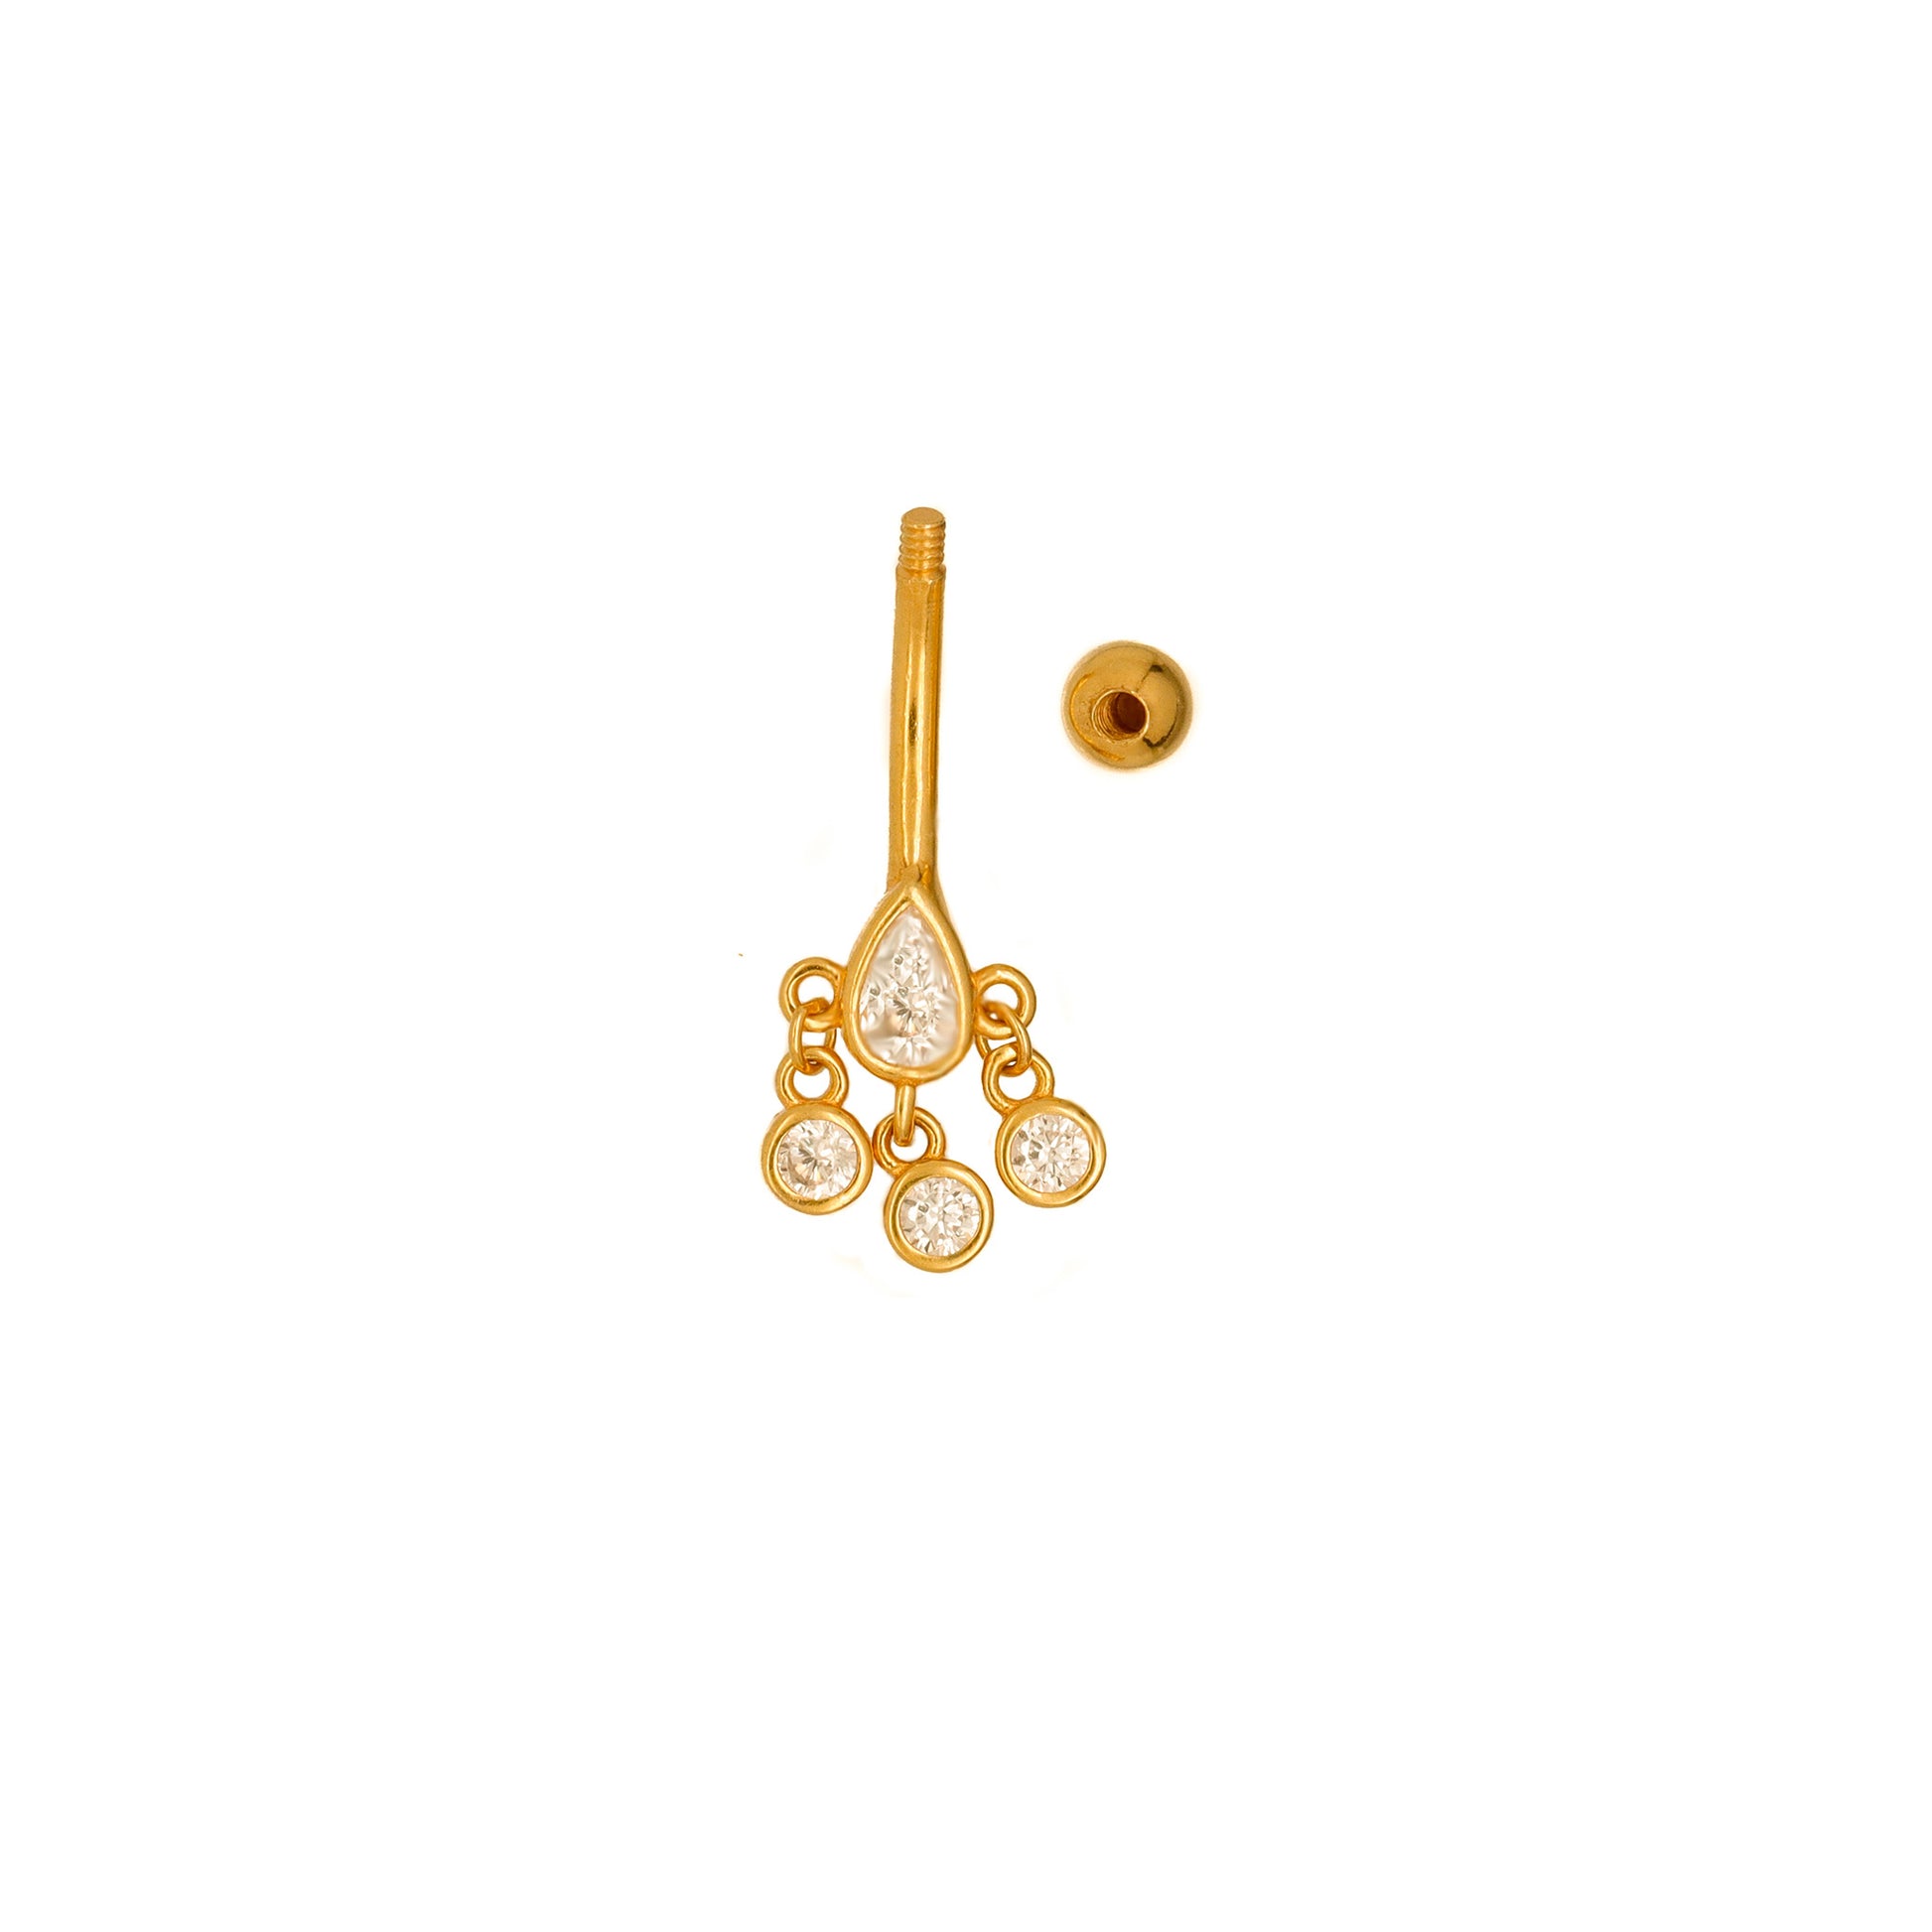 Vermeil | 925 Silver 24k Gold Coated Extra Flat Lower Chandelier Belly Ring with Charmes | 6mm 1/4" 8mm 5/16" 10mm 3/8" 12mm 1/2" 14mm 9/16" - Sturdy South